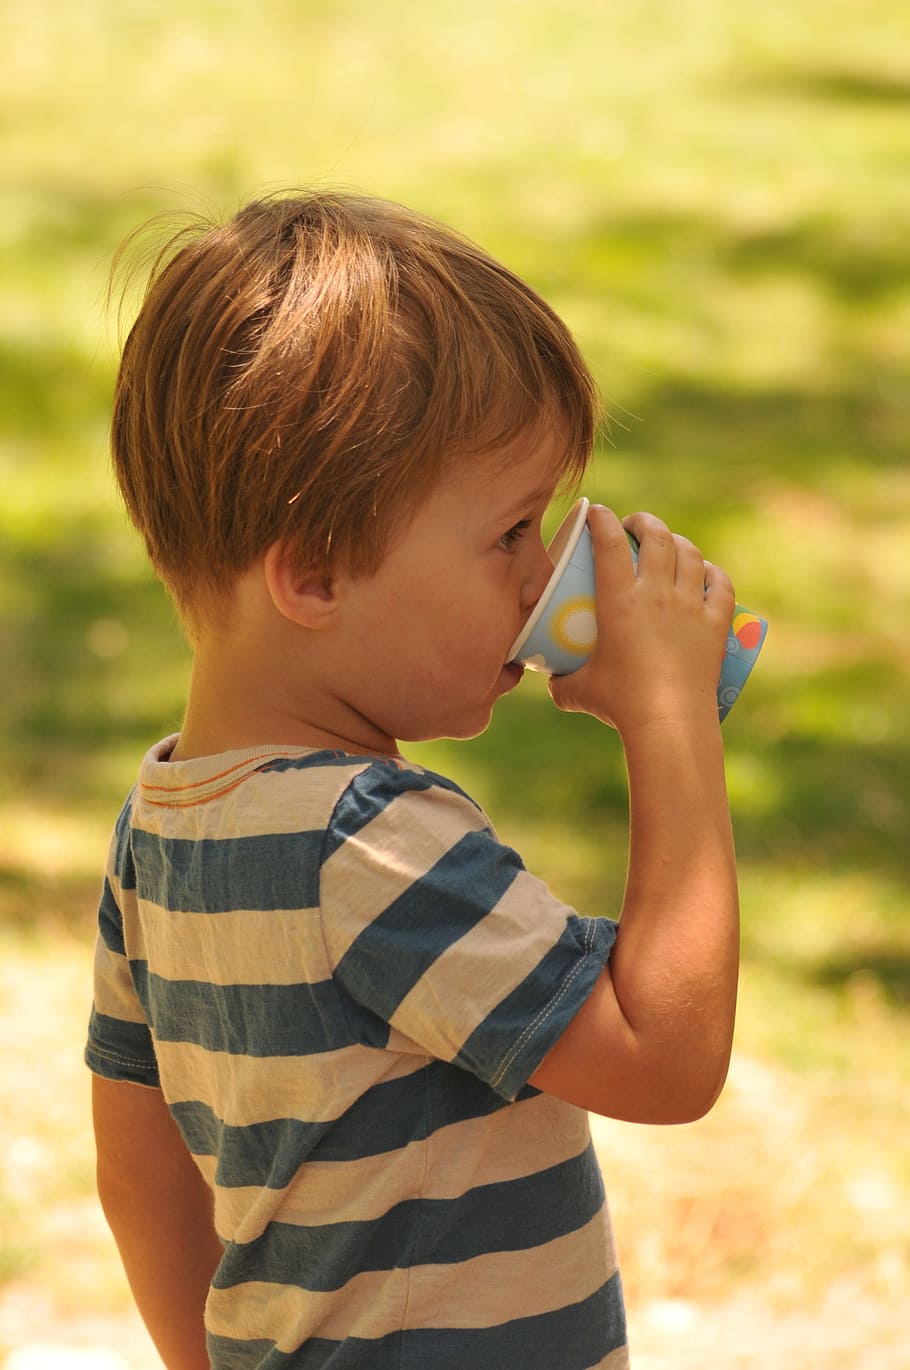 boy drinking, cyan cup, selective, focal, Children, Drinking, Nutrition, Family, lifestyle, healthy